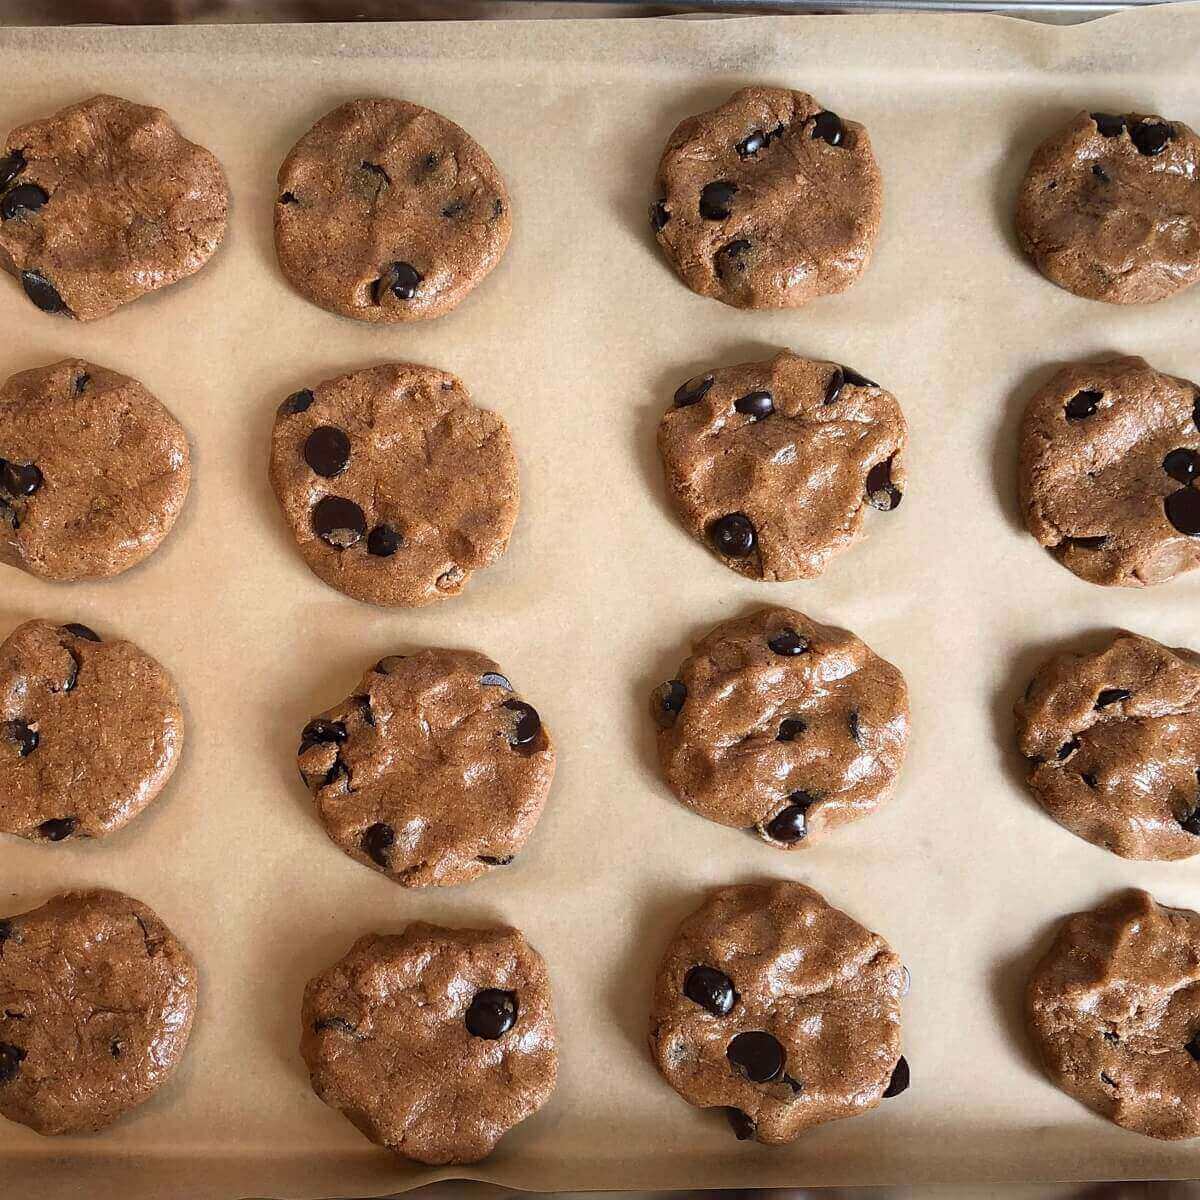 Raw maple chocolate cookies on a baking pan.